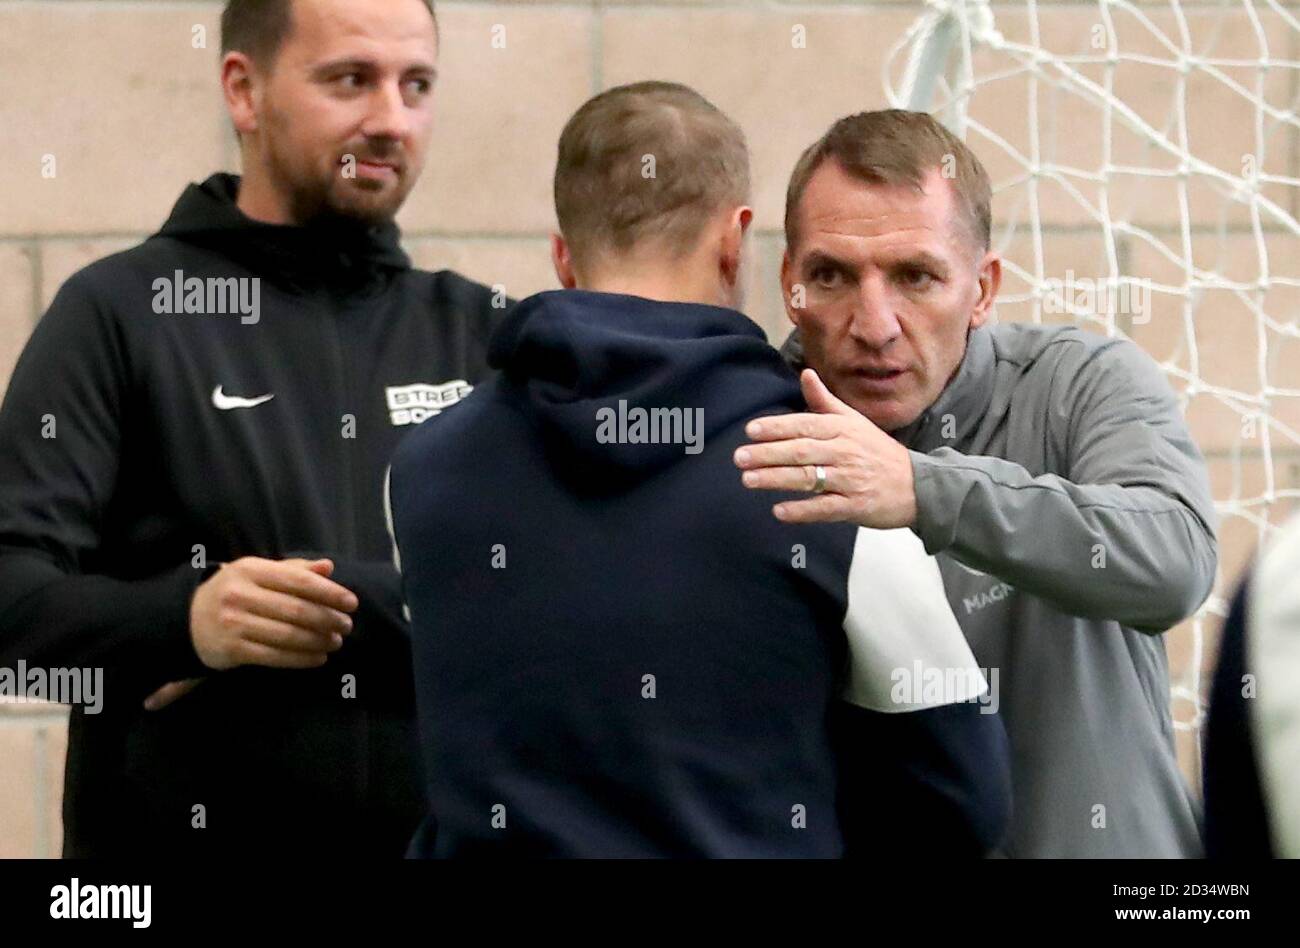 Celtic's Leigh Griffiths (centre) is hugged by manager Brendan Rodgers (right) alongside Street Soccer founder and CEO David Duke (left) as the men and women Street Soccer teams take part in a special training session at Lennoxtown, Glasgow. Stock Photo